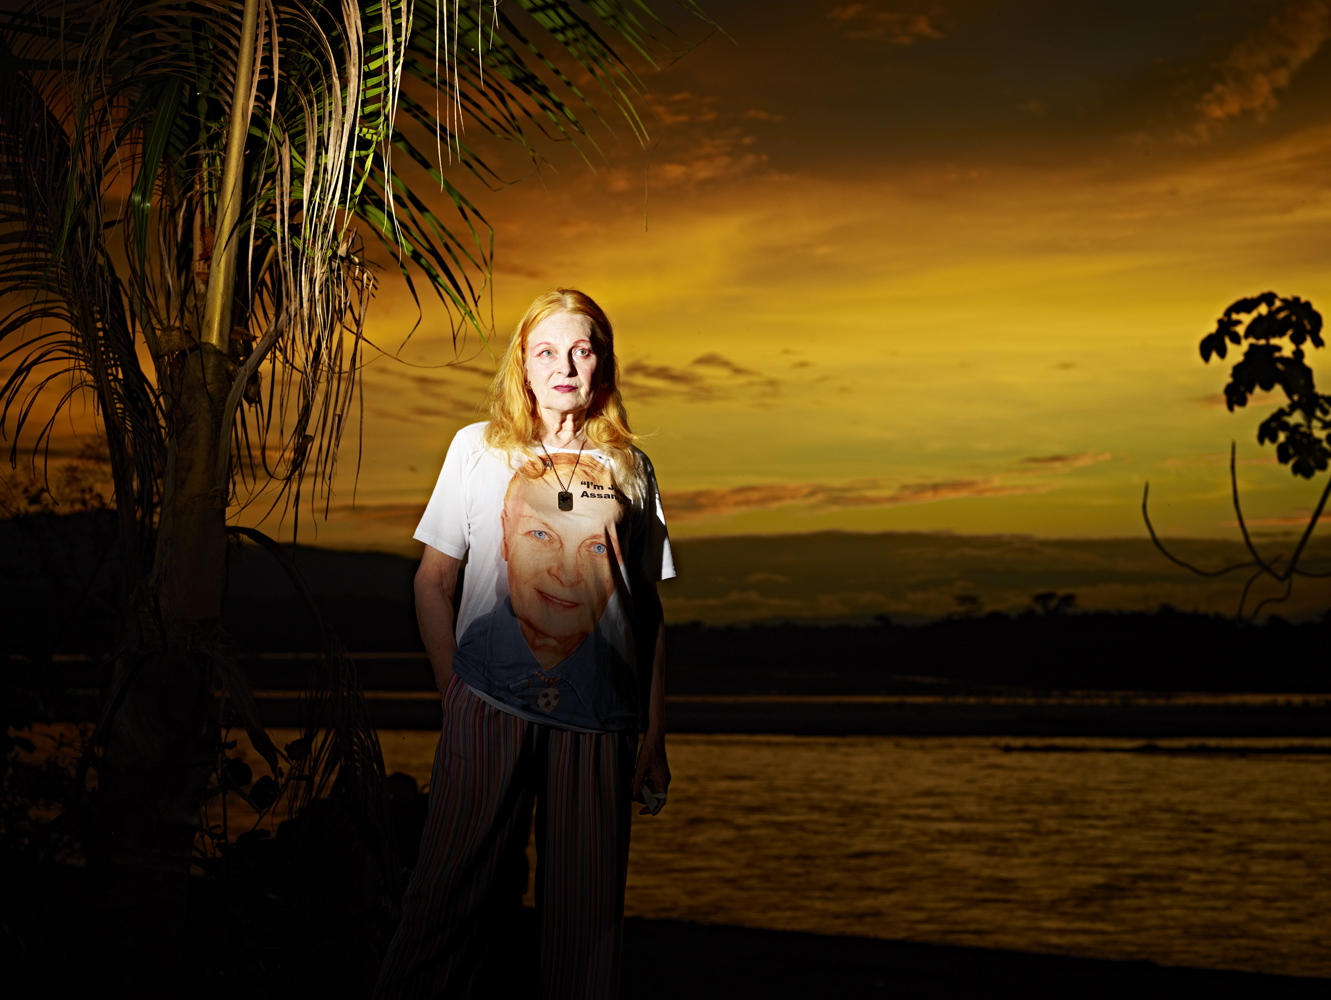 Vivienne Westwood stands in the rainforest at sunset